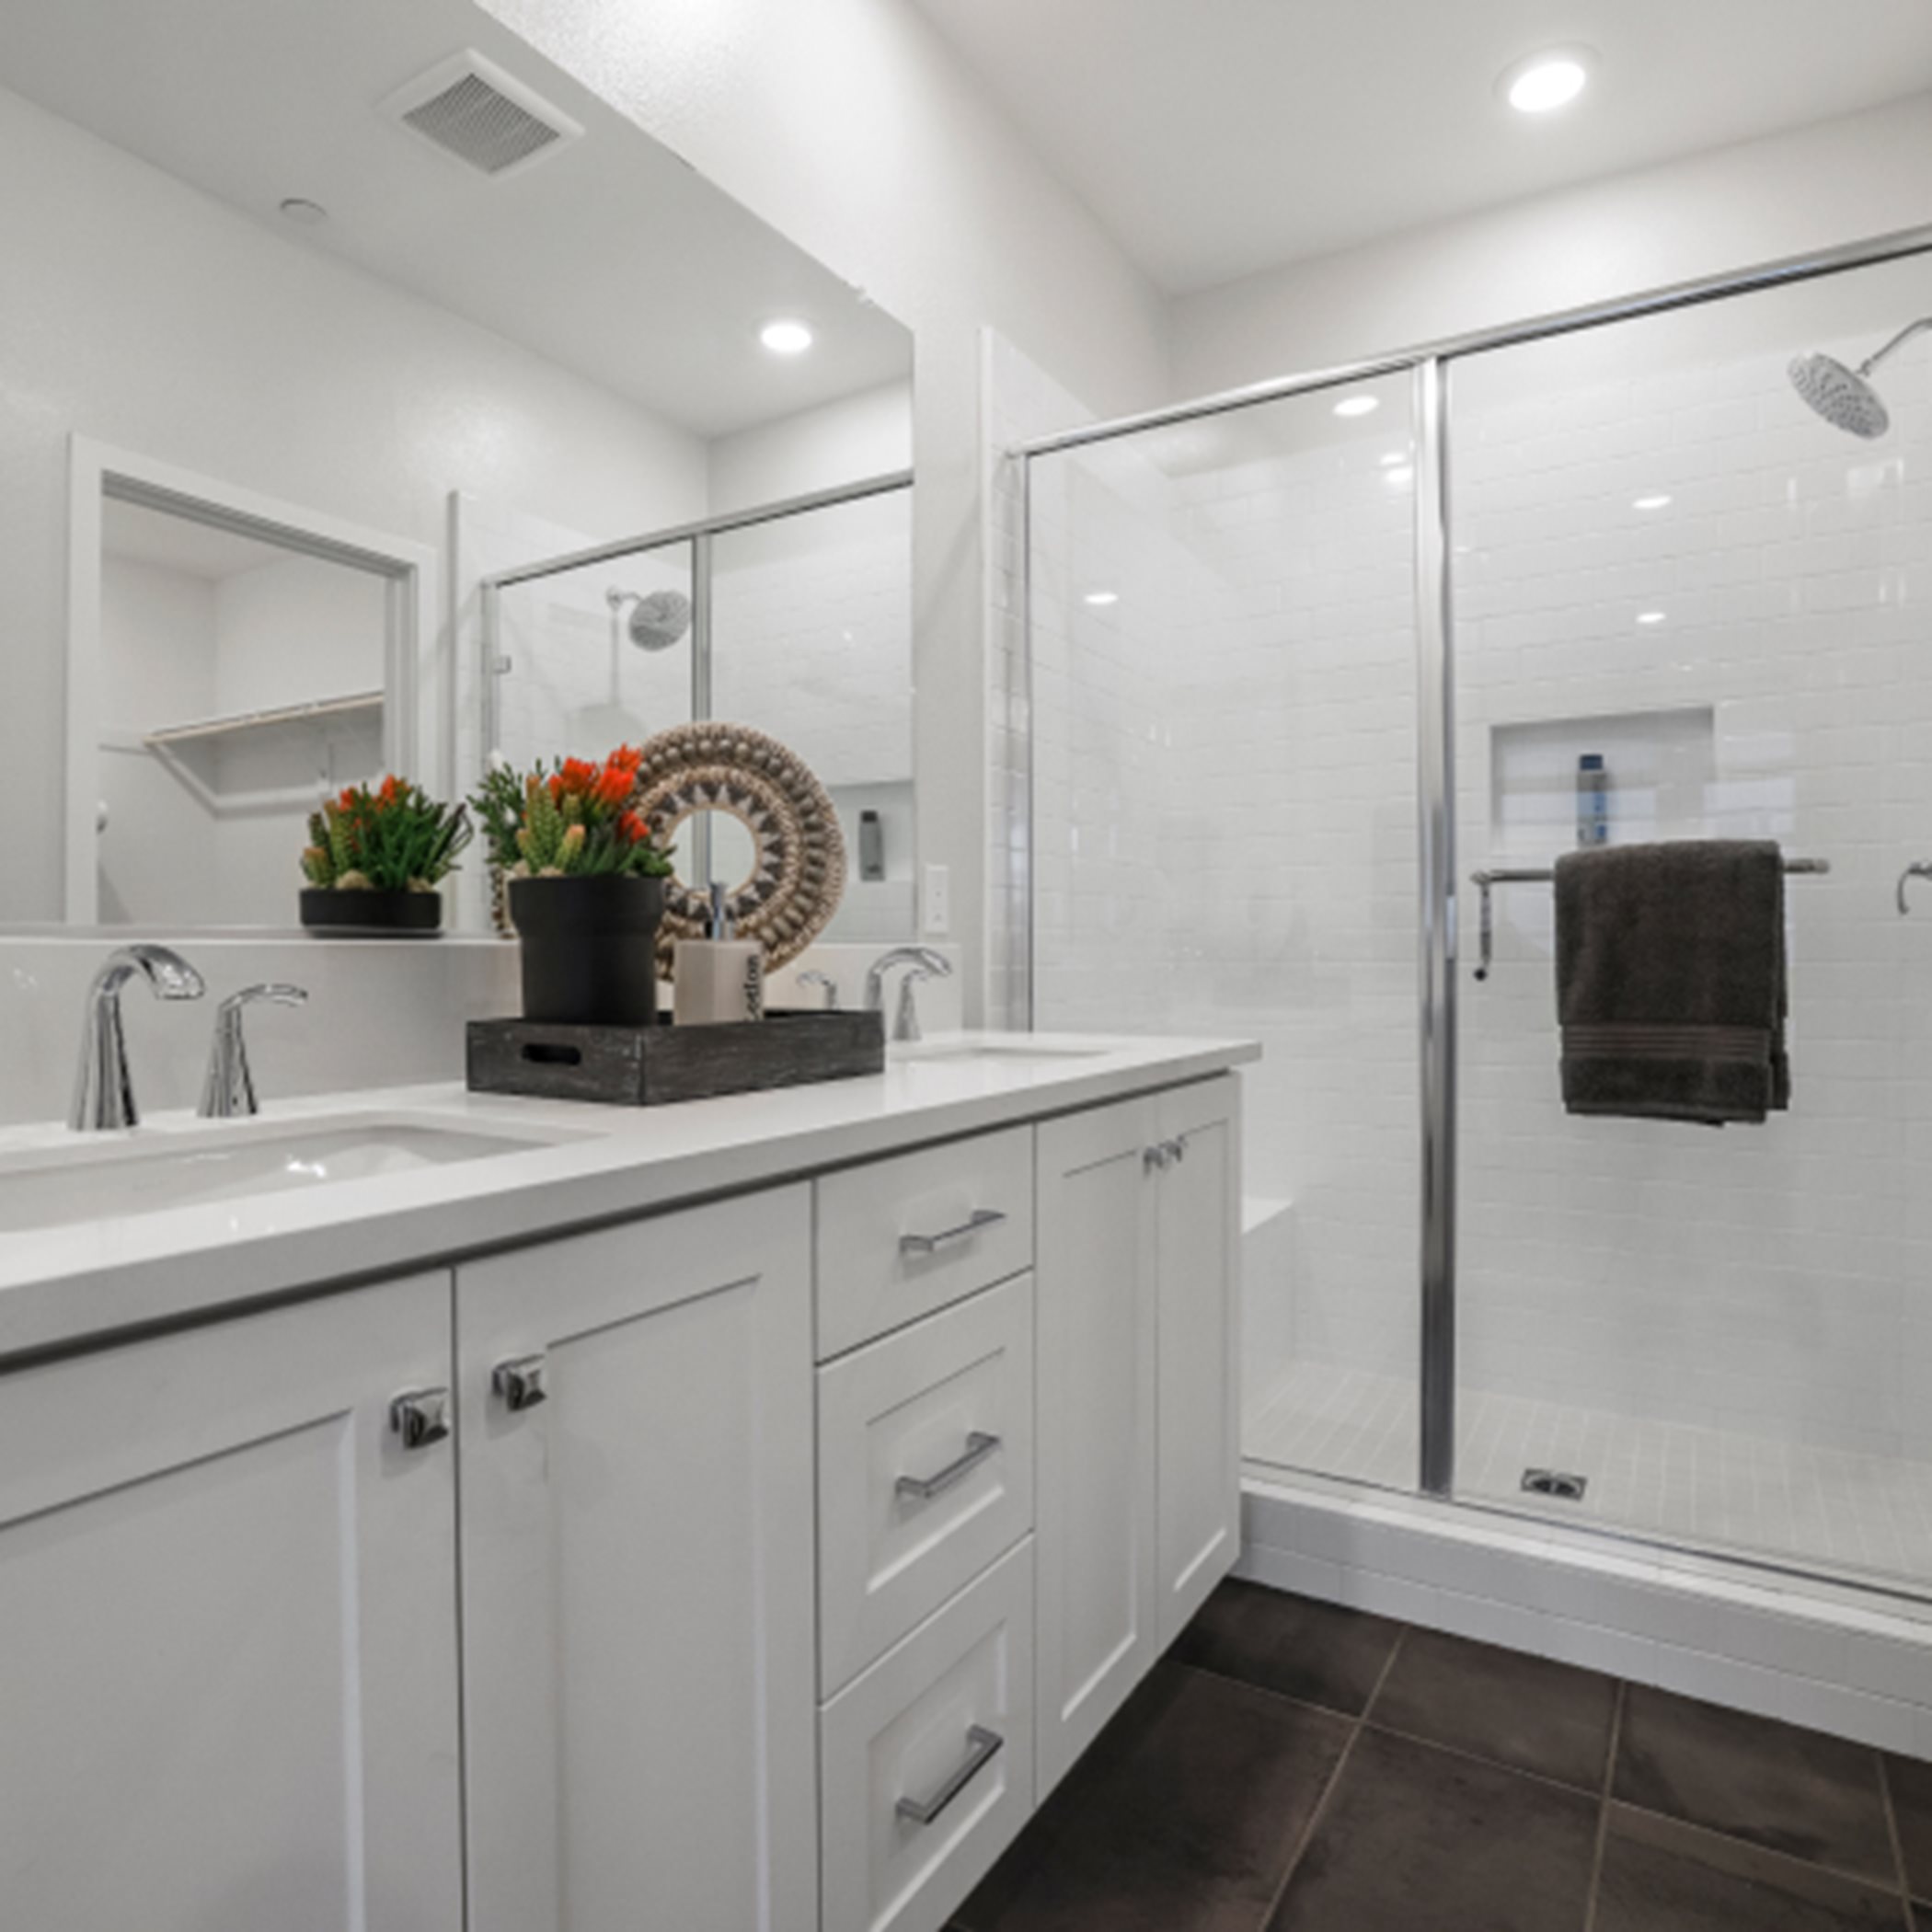 Owner's bathroom with glass-enclosed shower